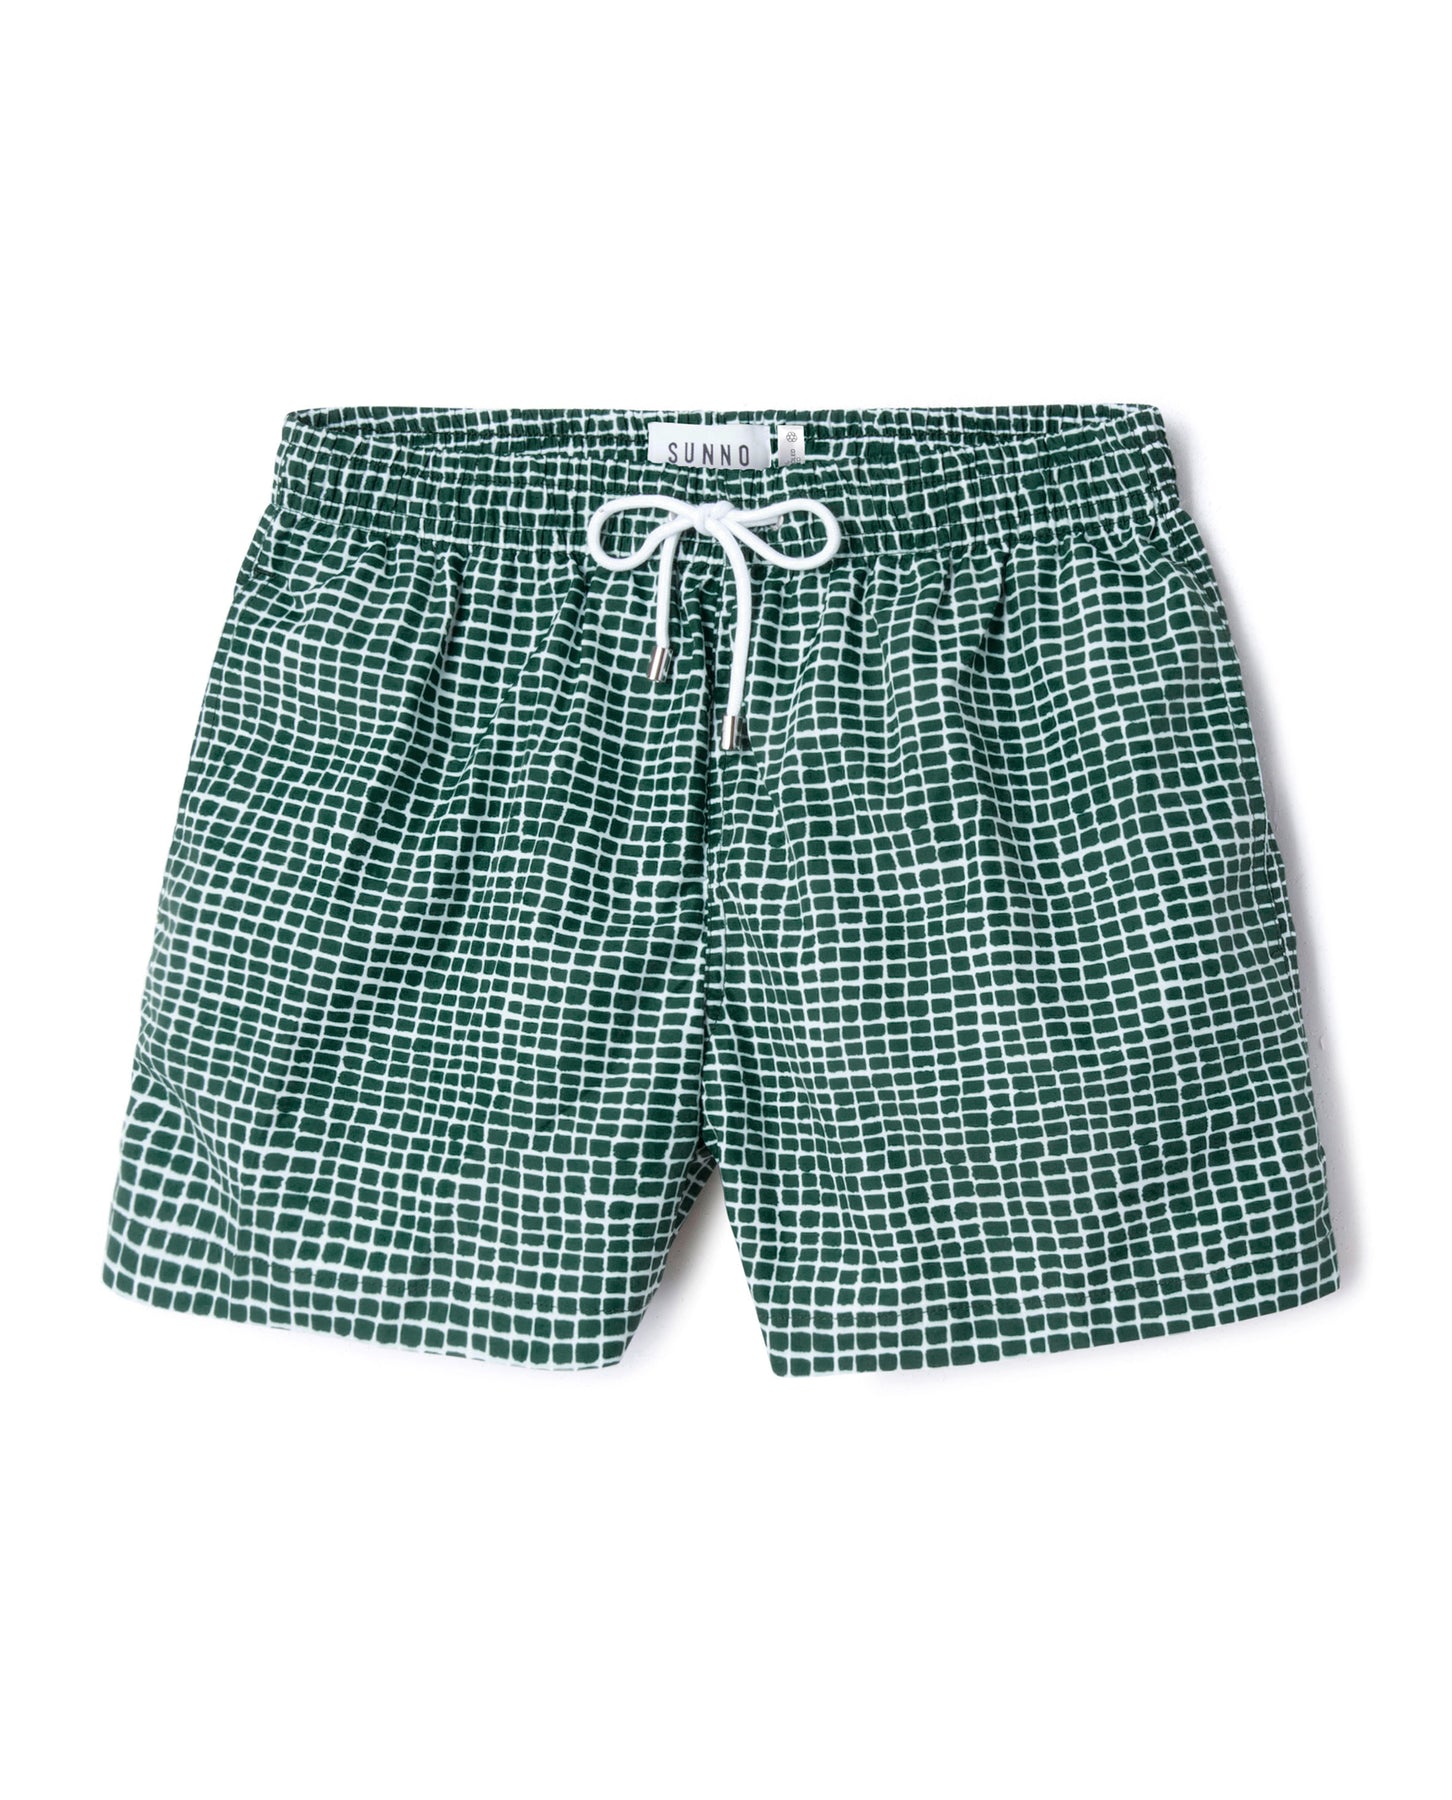 Printed Green Recycled Fabric Swim Short | Sunno by Bene Cape – SUNNO ...